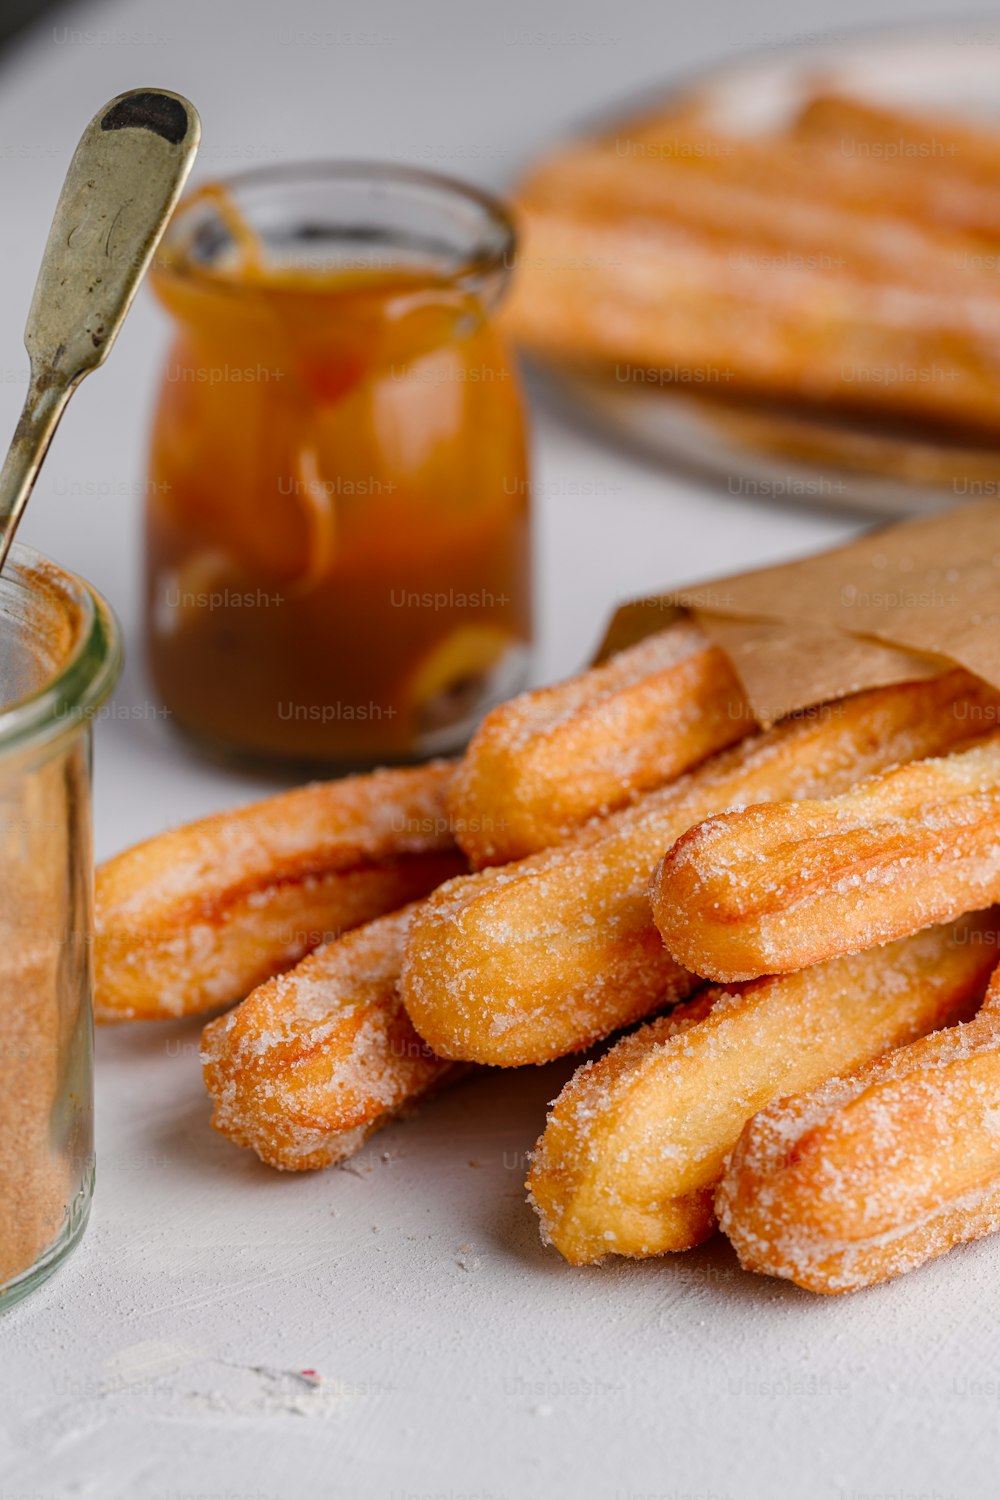 a pile of sugared donuts next to a jar of honey